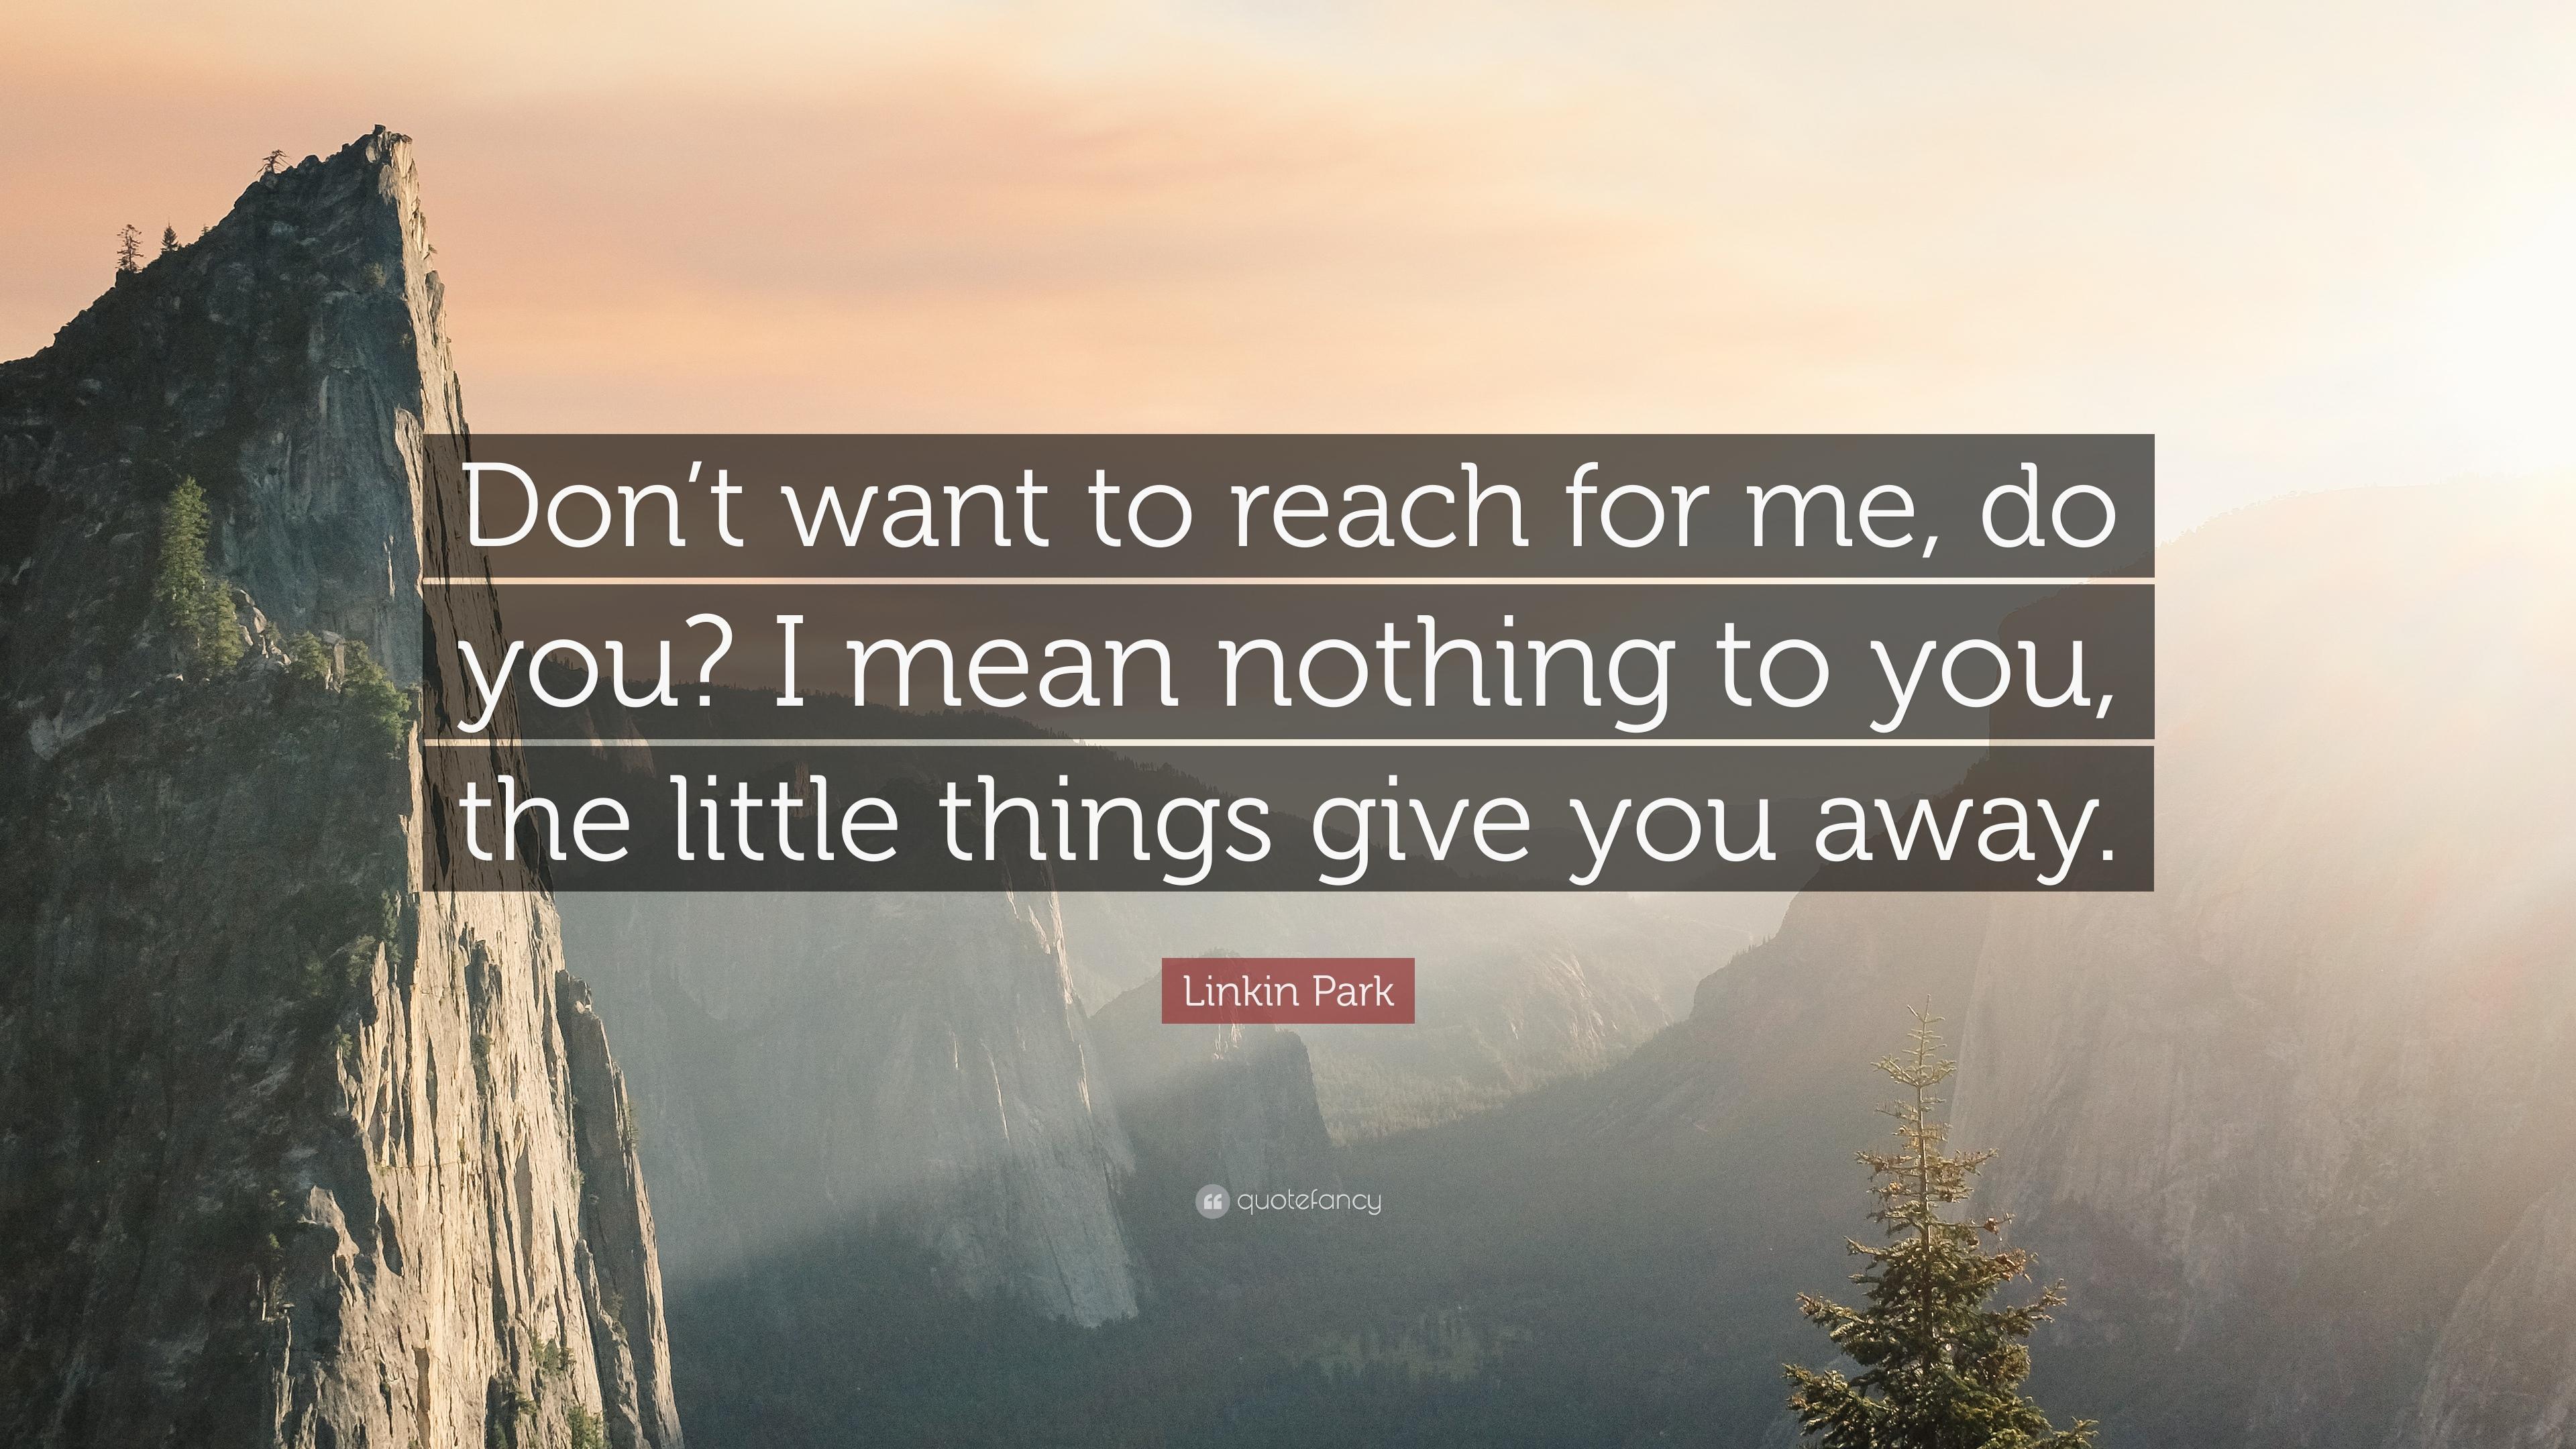 Linkin Park Quote: “Don't want to reach for me, do you? I